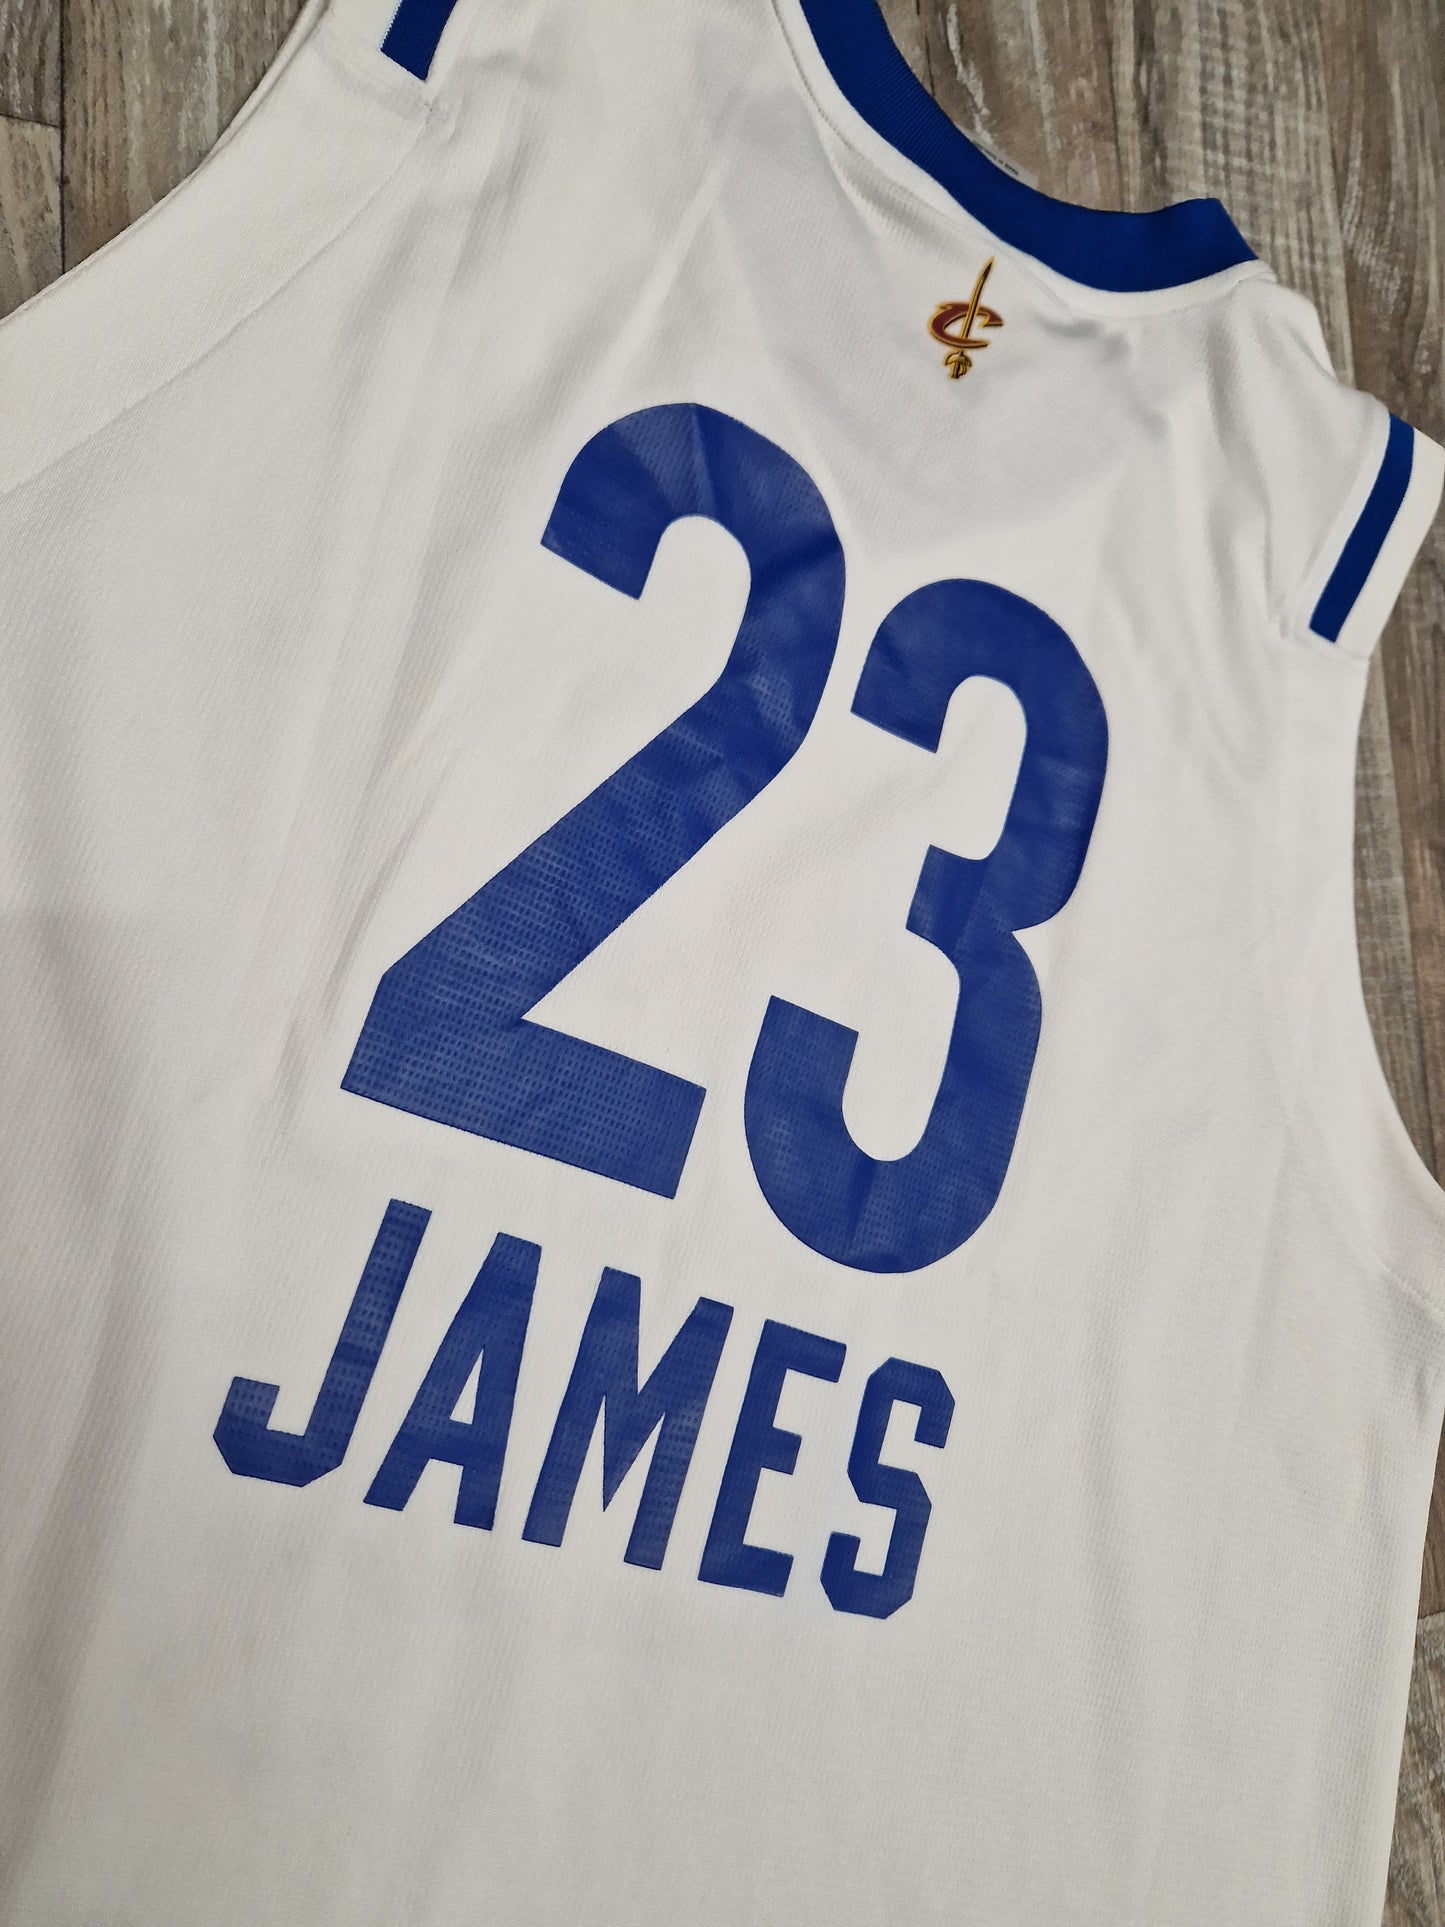 LeBron James NBA All Star 2016 Jersey Size Large